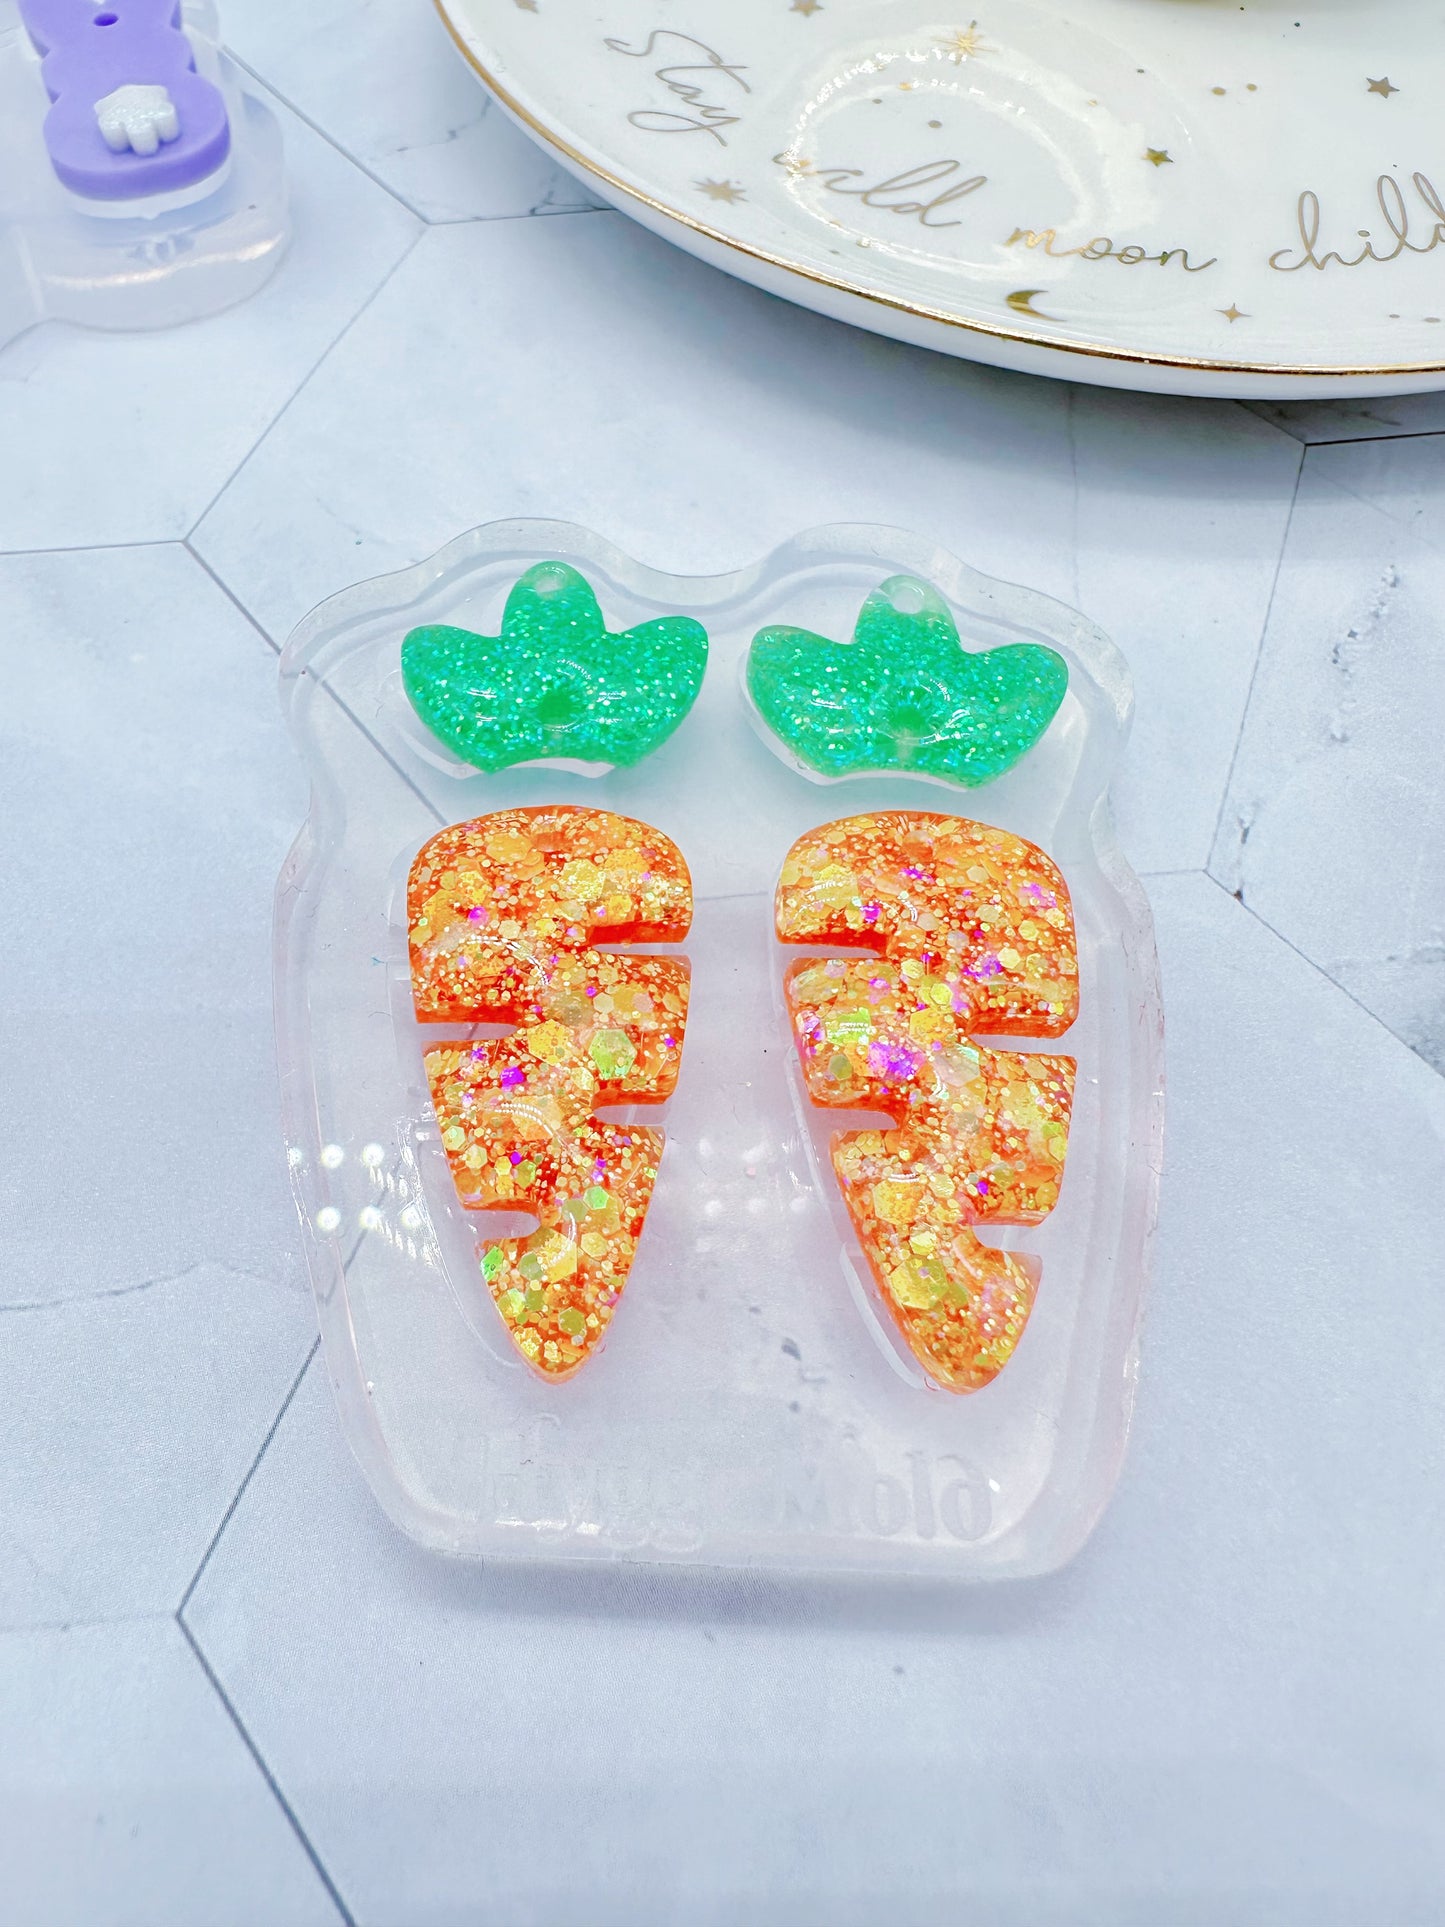 Pre-domed Carrot Dangle Earring Mold Funky Cute Easter Clear Silicone Mold for Resin